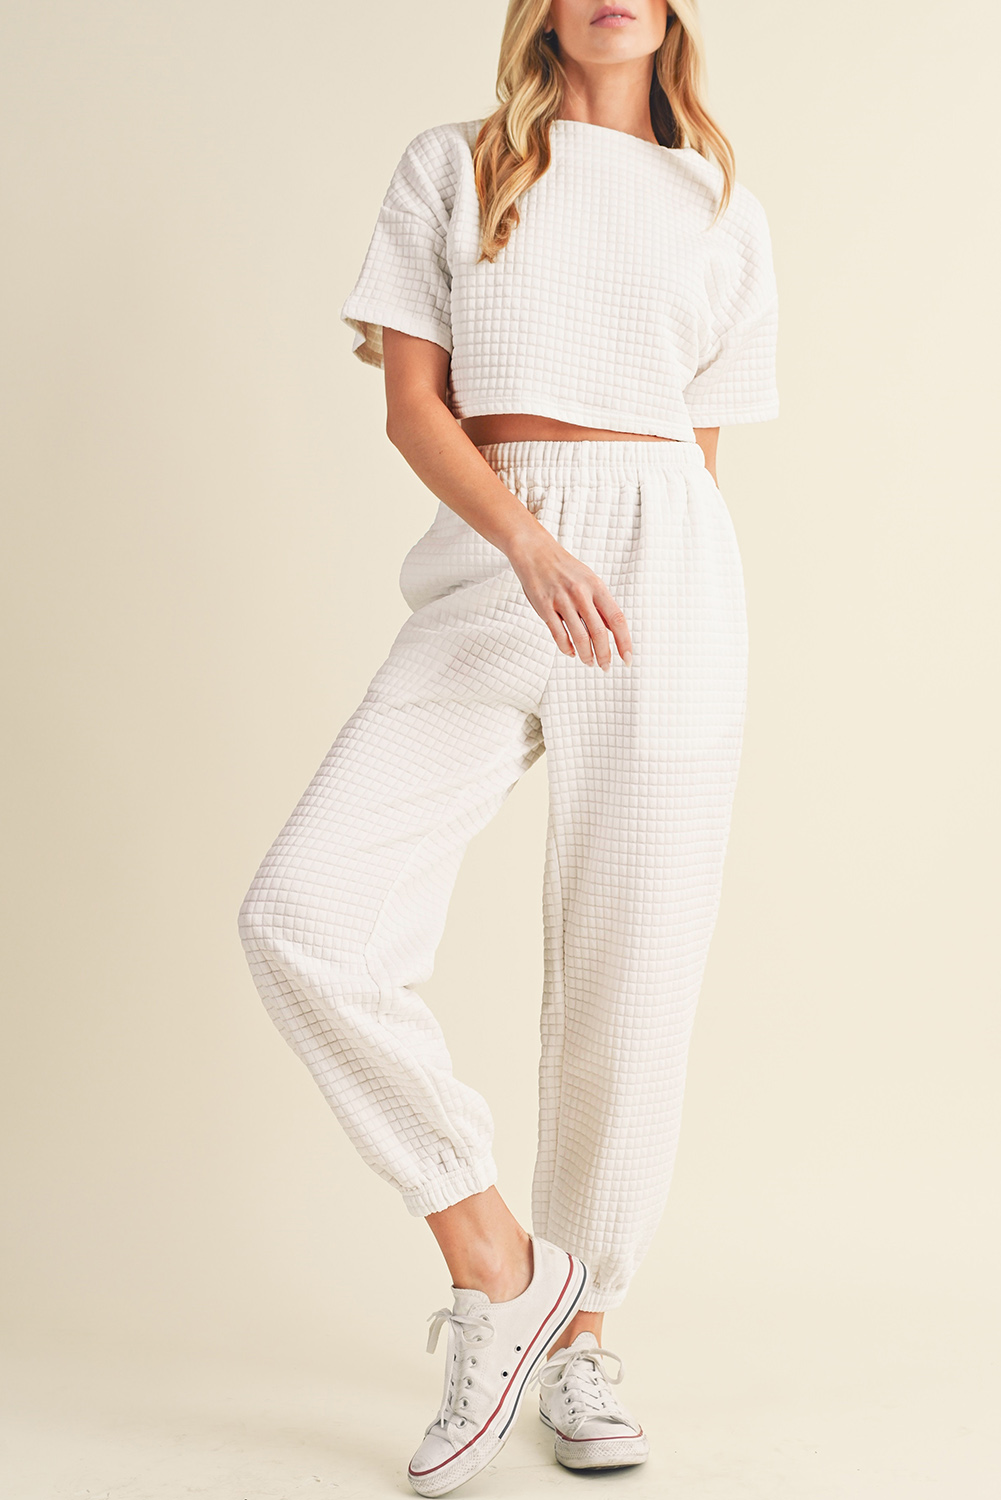 Shewin Wholesale Fashion White Lattice Textured Cropped Tee and Jogger PANTS Set